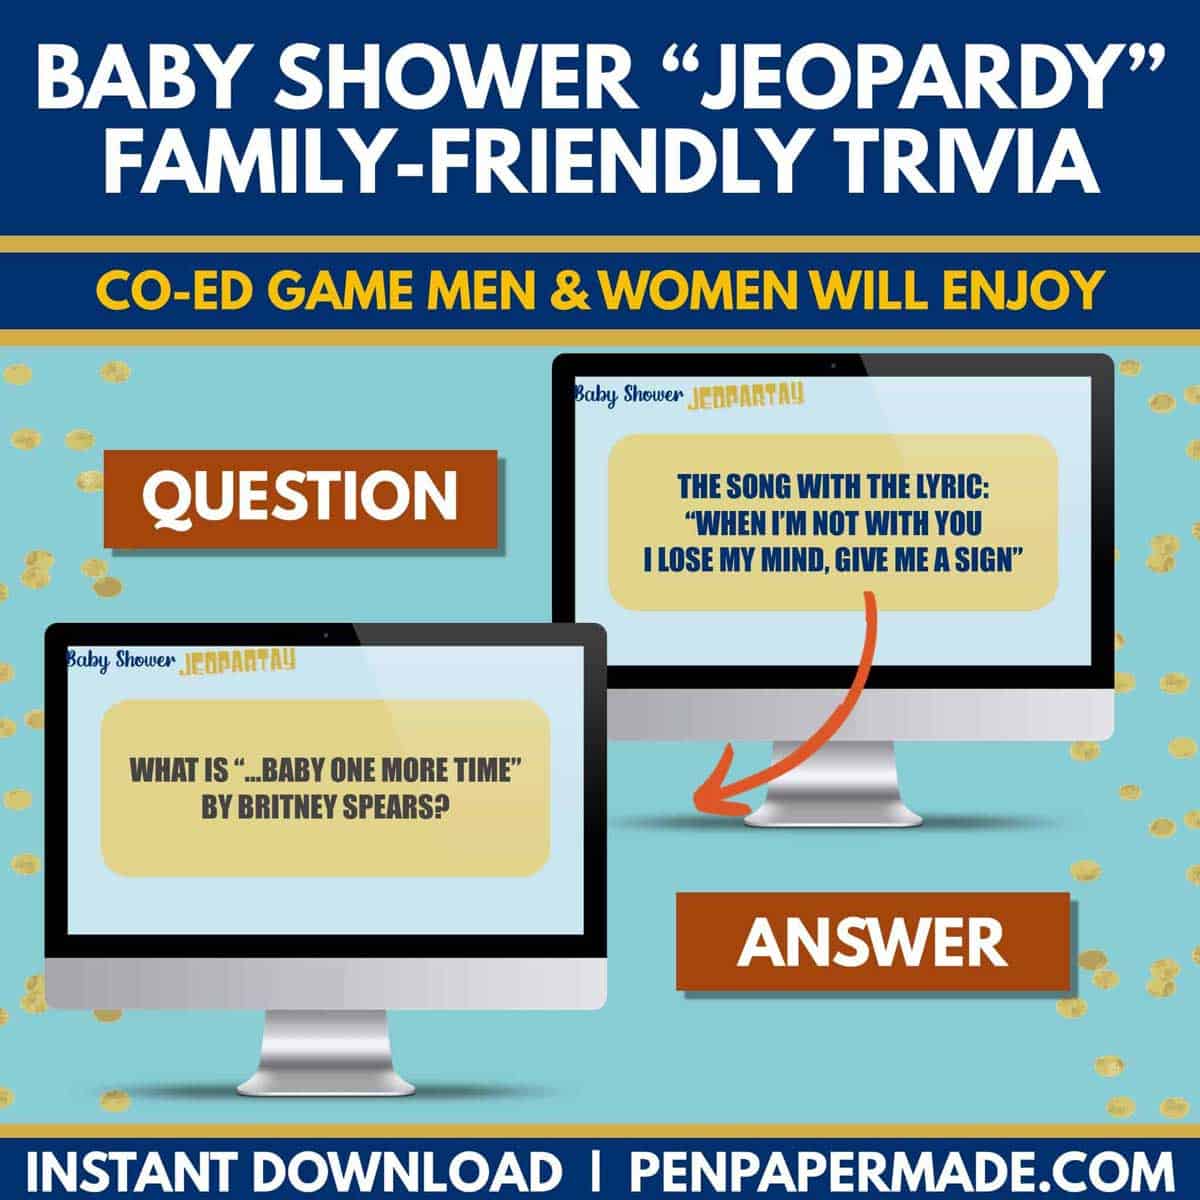 fun blue baby shower jeopardy questions like matching song lyrics with baby in it.